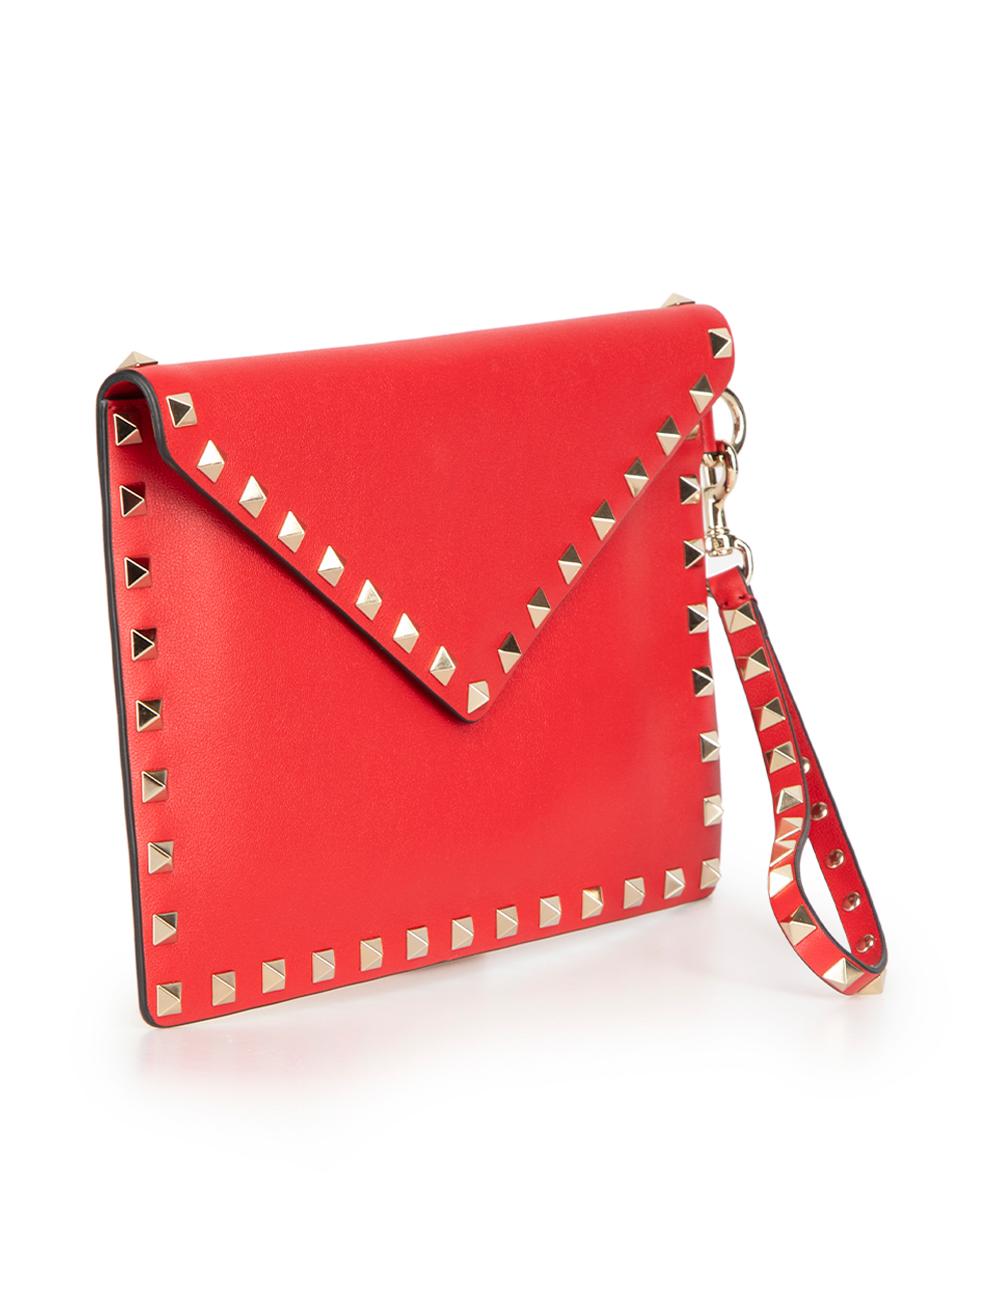 CONDITION is Never worn, with tags. No visible wear to pouch is evident on this new Valentino designer resale item.
 
Details
Red
Leather
Mini clutch bag
Envelope flap with magnetic fastening
Rockstud detail
Detachable wristlet
1x Main